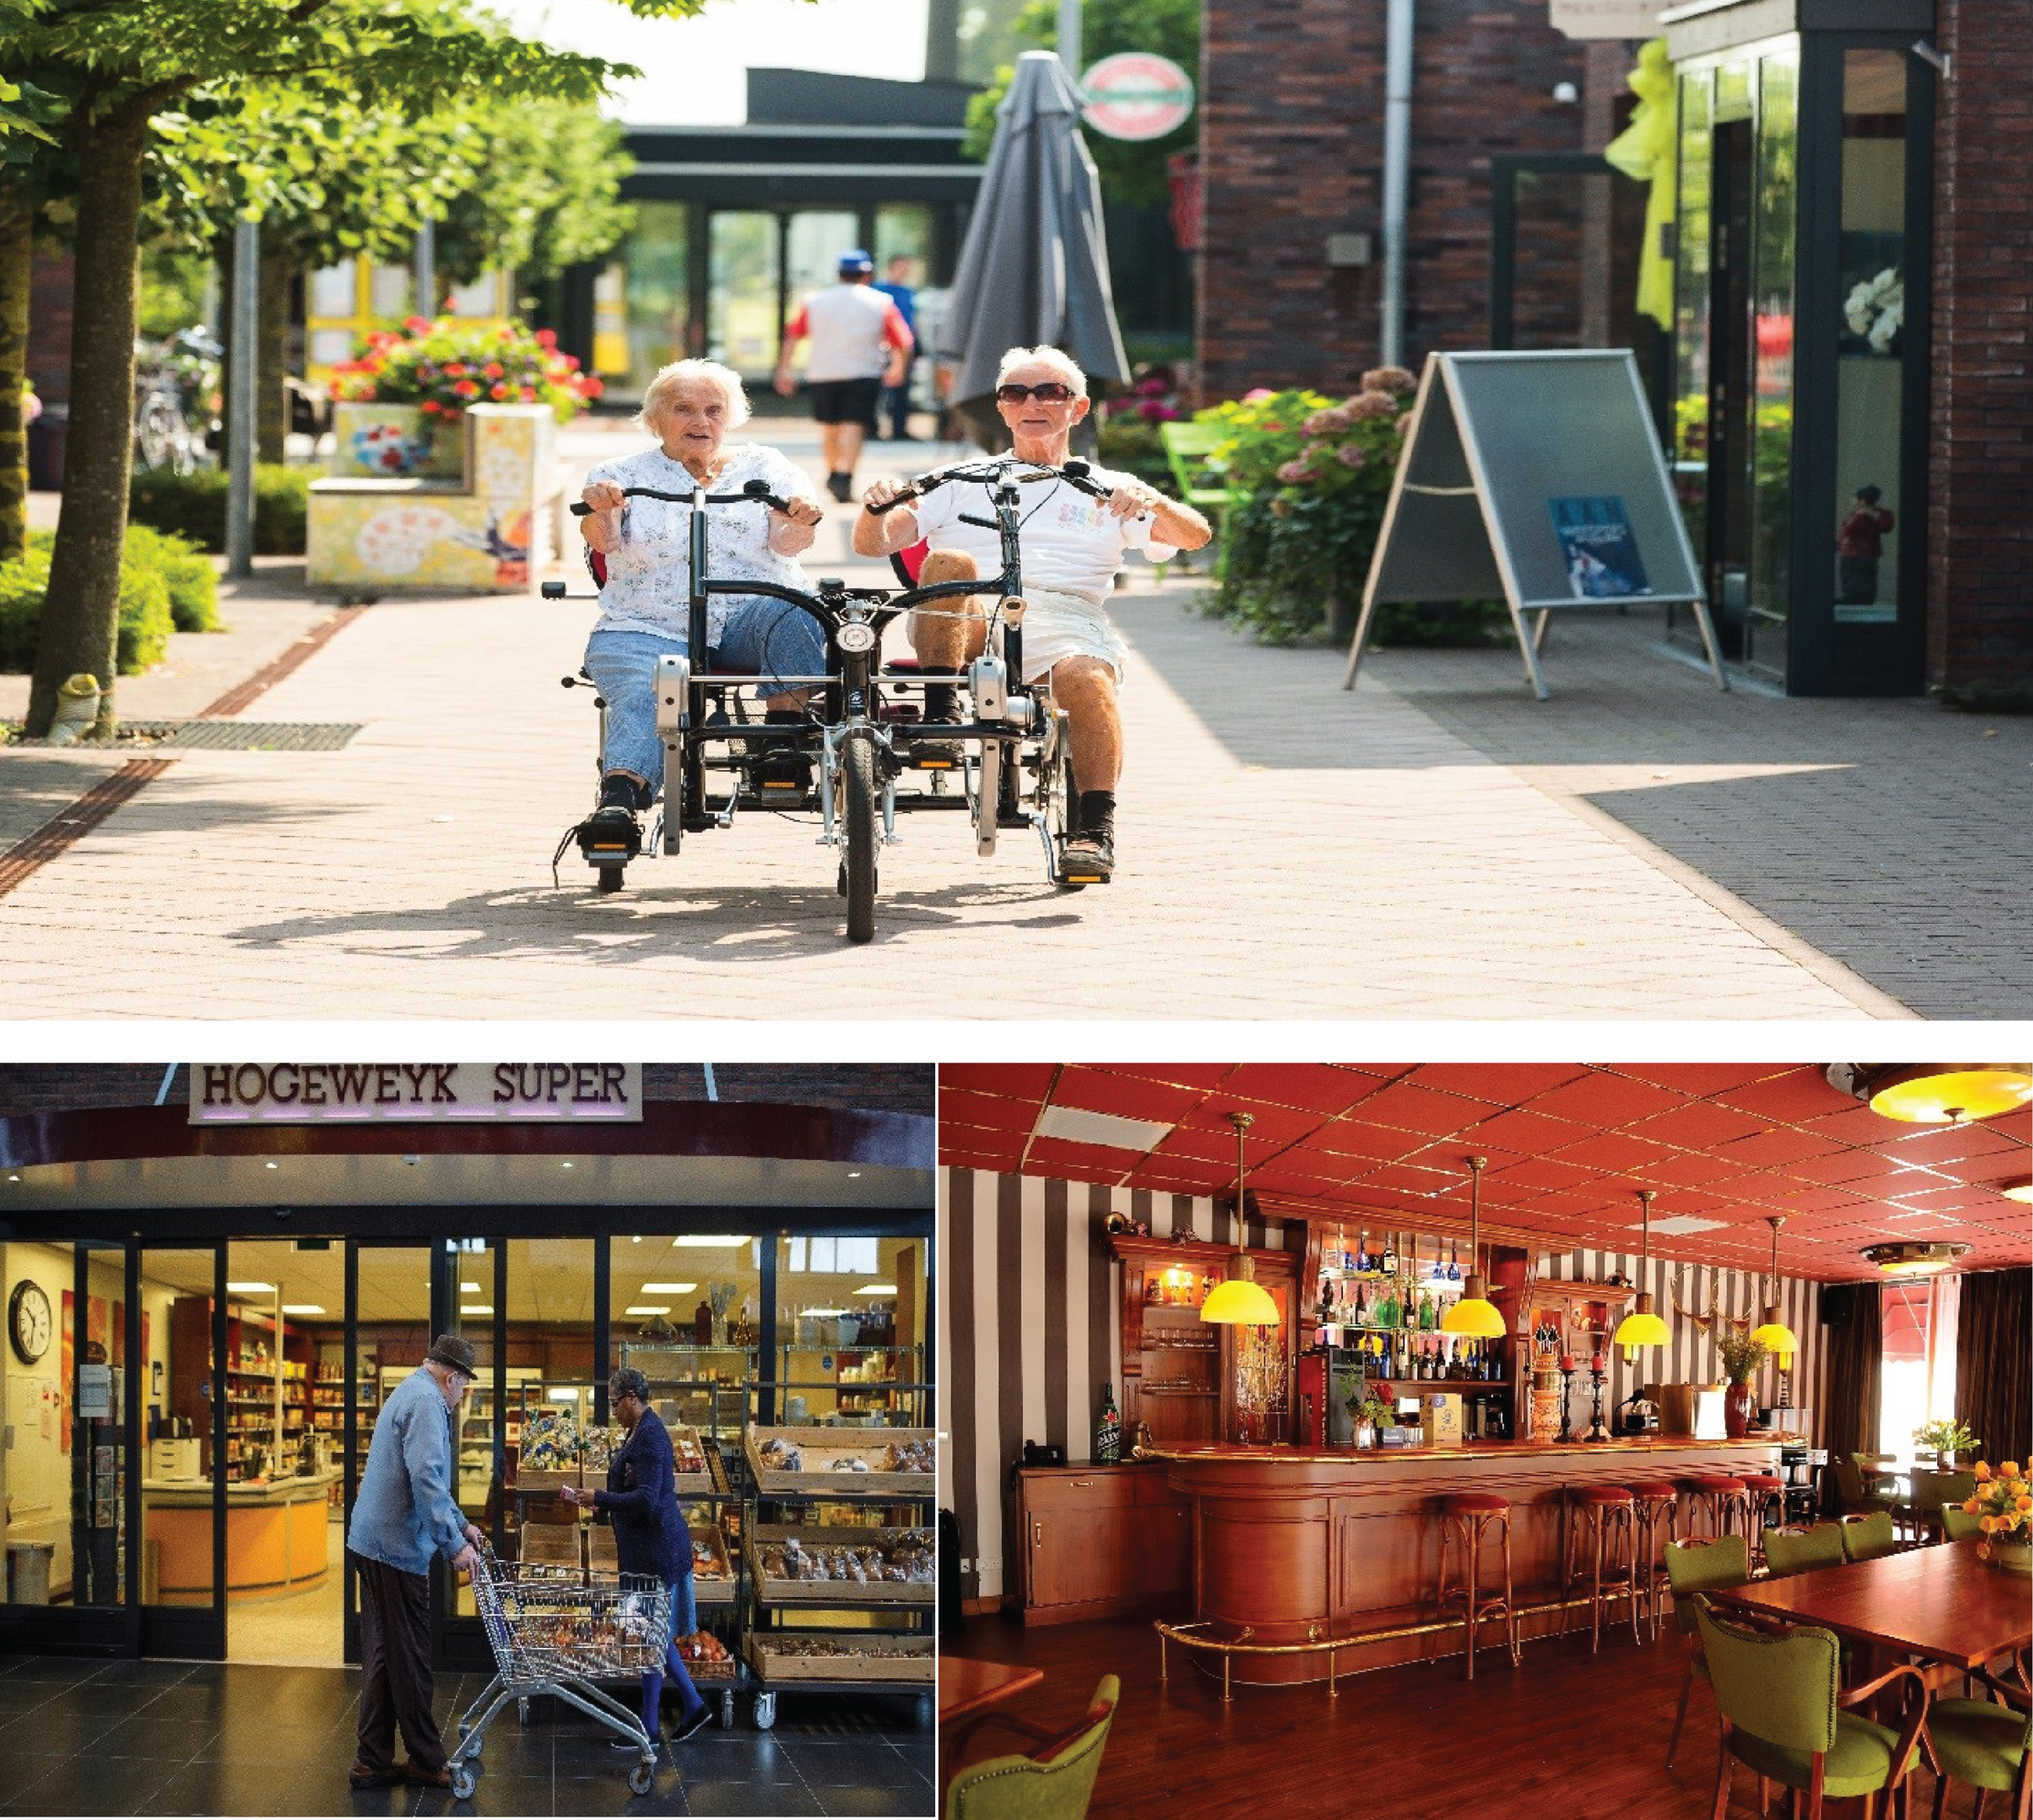 A day in the life of the De Hogeweyk Dementia Village in Weesp, The Netherlands. Reprinted with permission from the Hogeweyk® Care Concept.